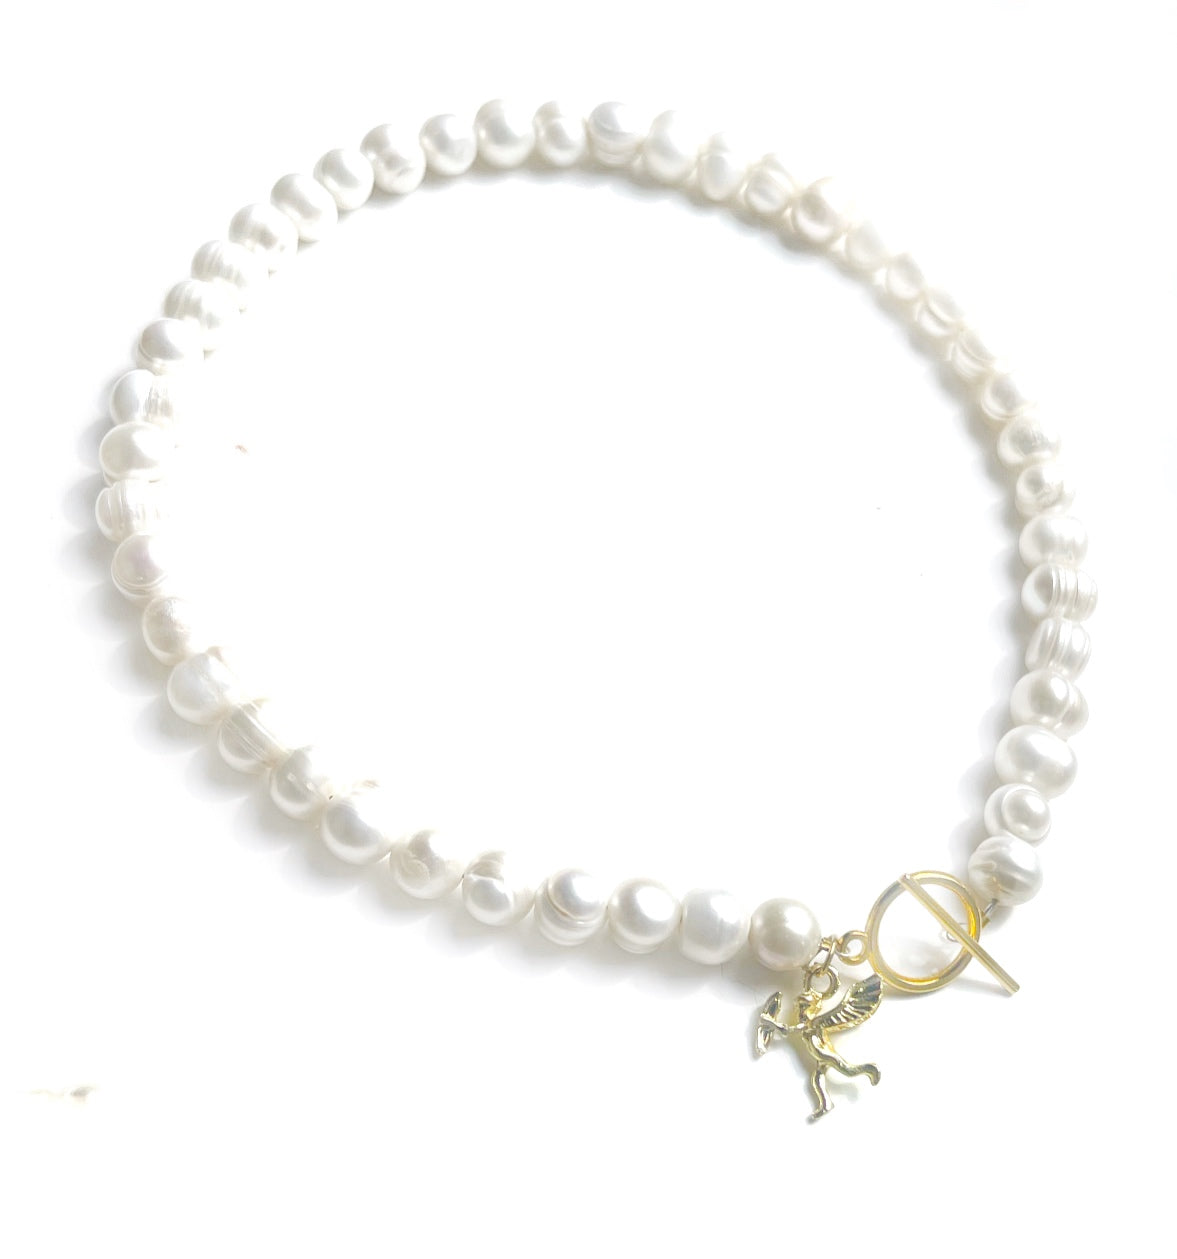 White pearl charm necklace with dainty gold Cupid / cherub charm, classic white pearl jewelry, unique pearl jewelry, summer jewelry